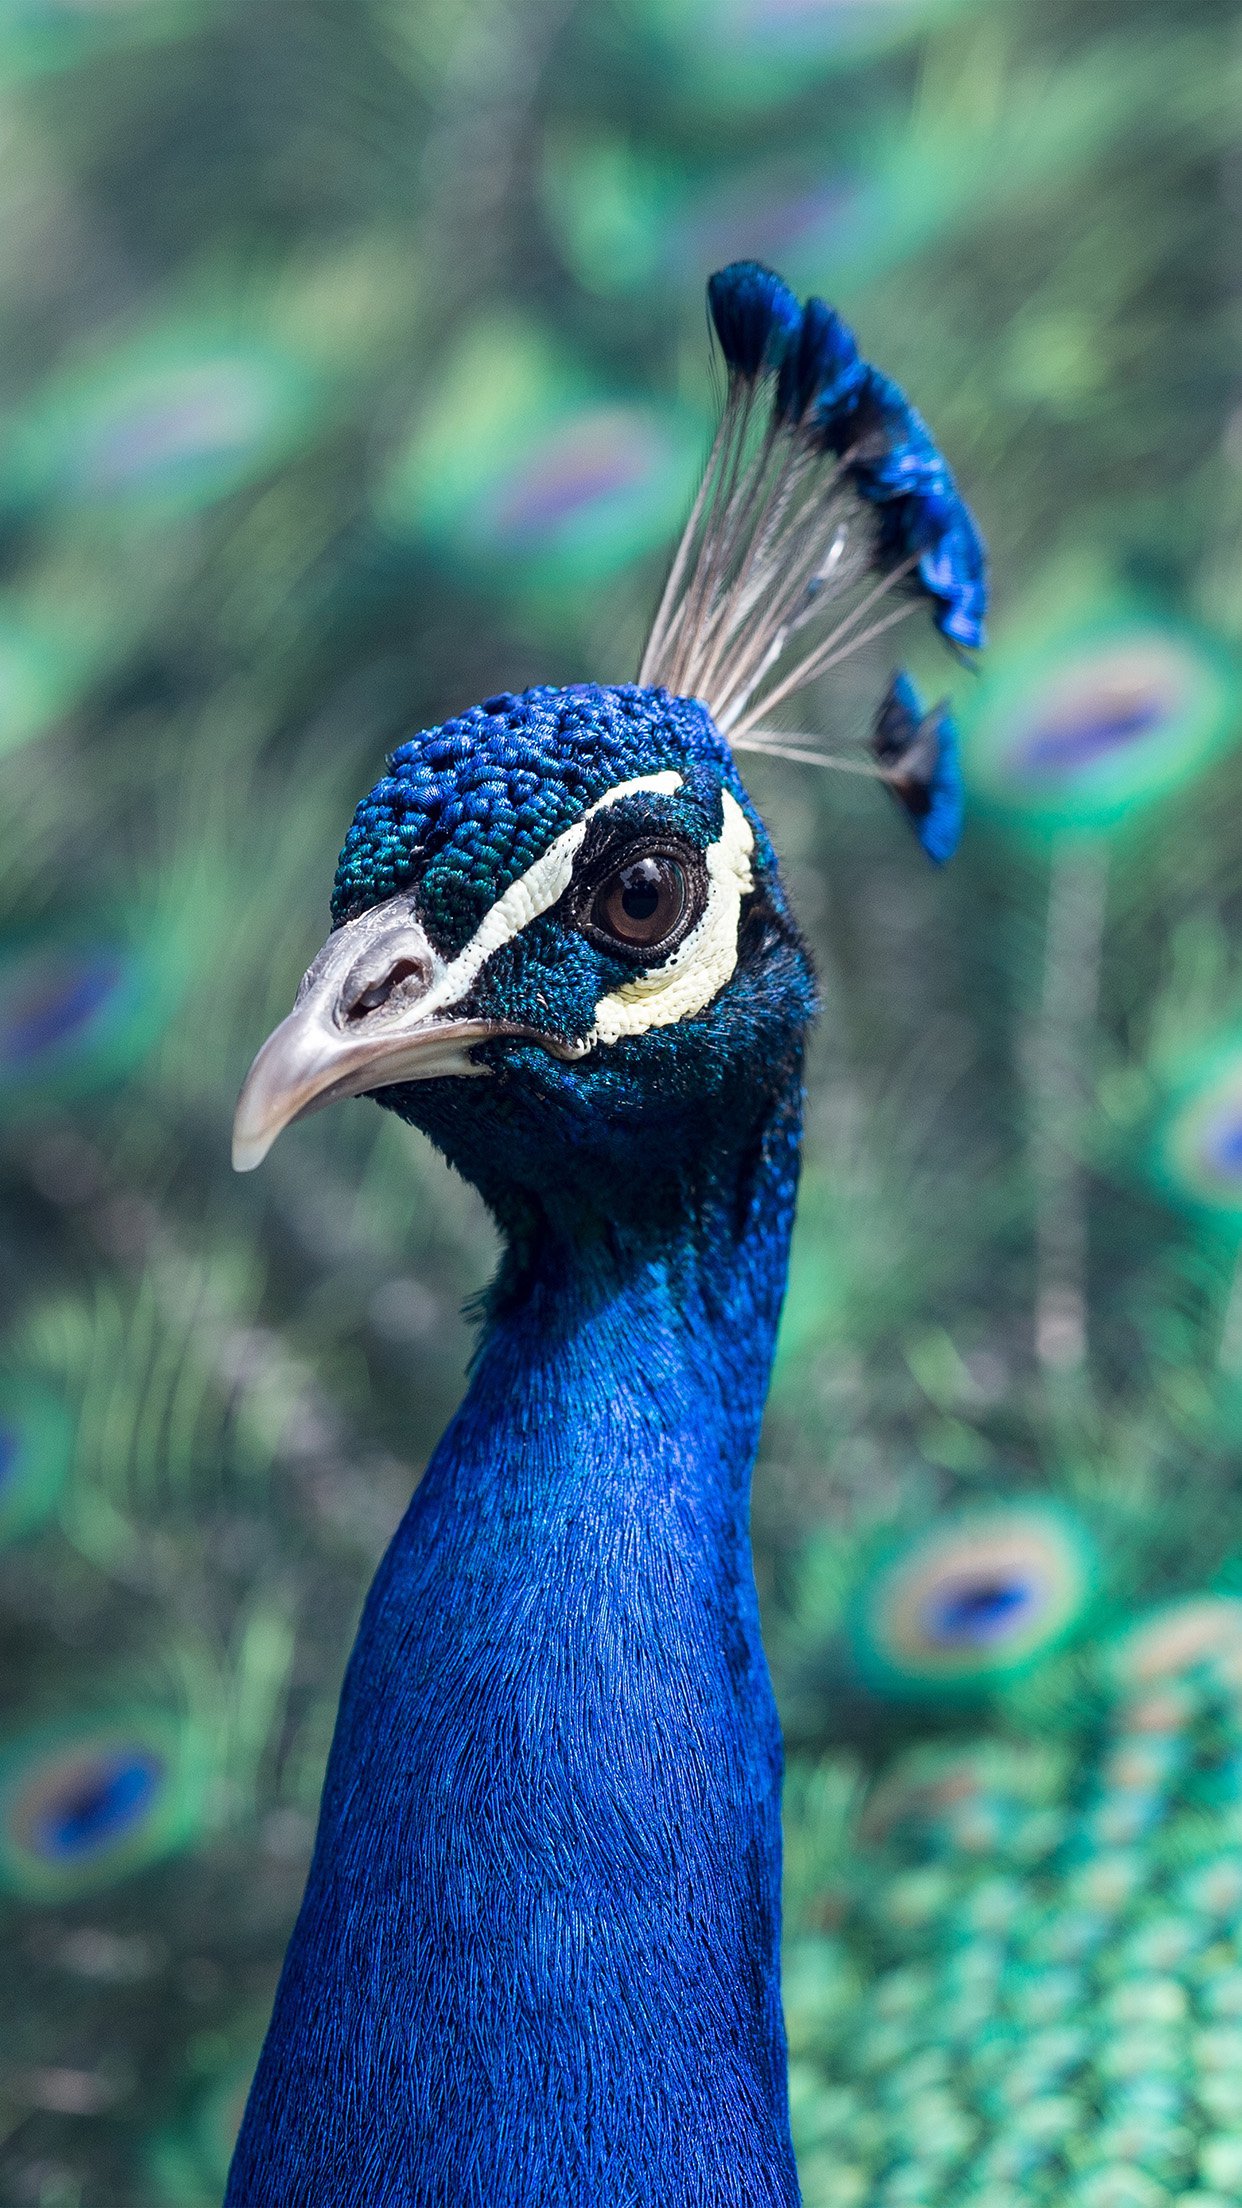 Peacock Animal Bird Nature Blue Android wallpaper